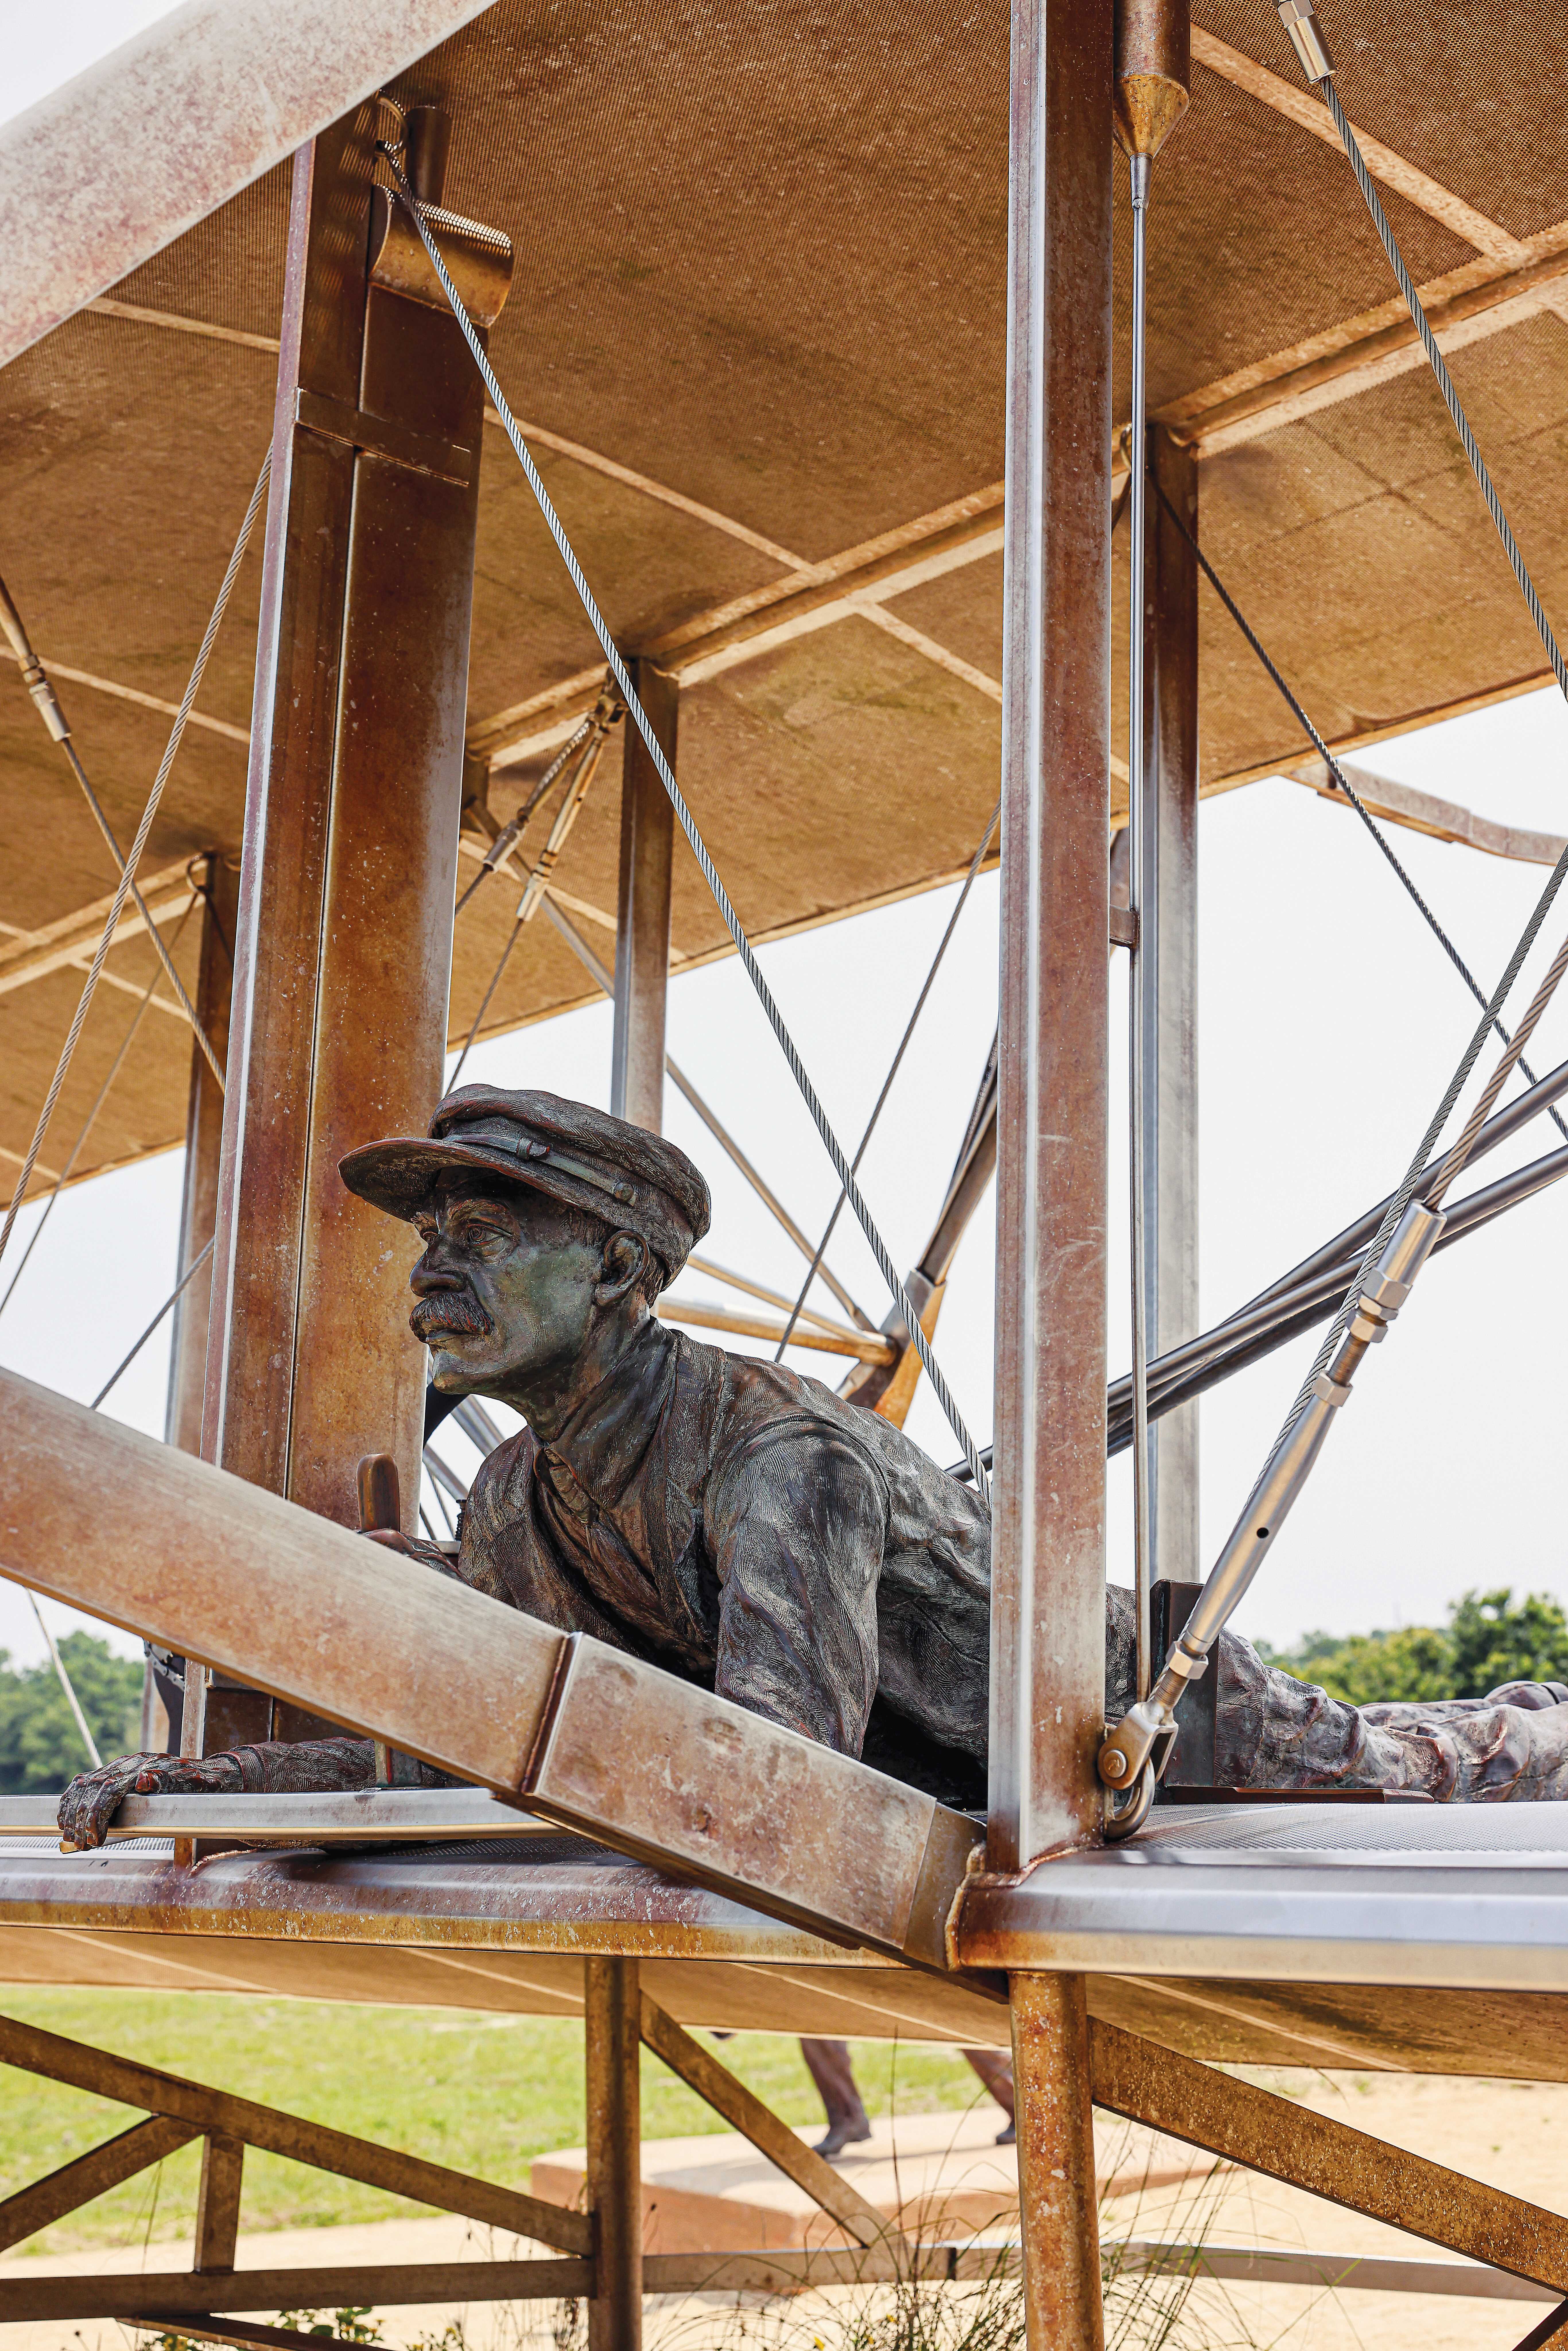 First Flight Airport, Wright Brothers Memorial Double as Vacation Hot Spot